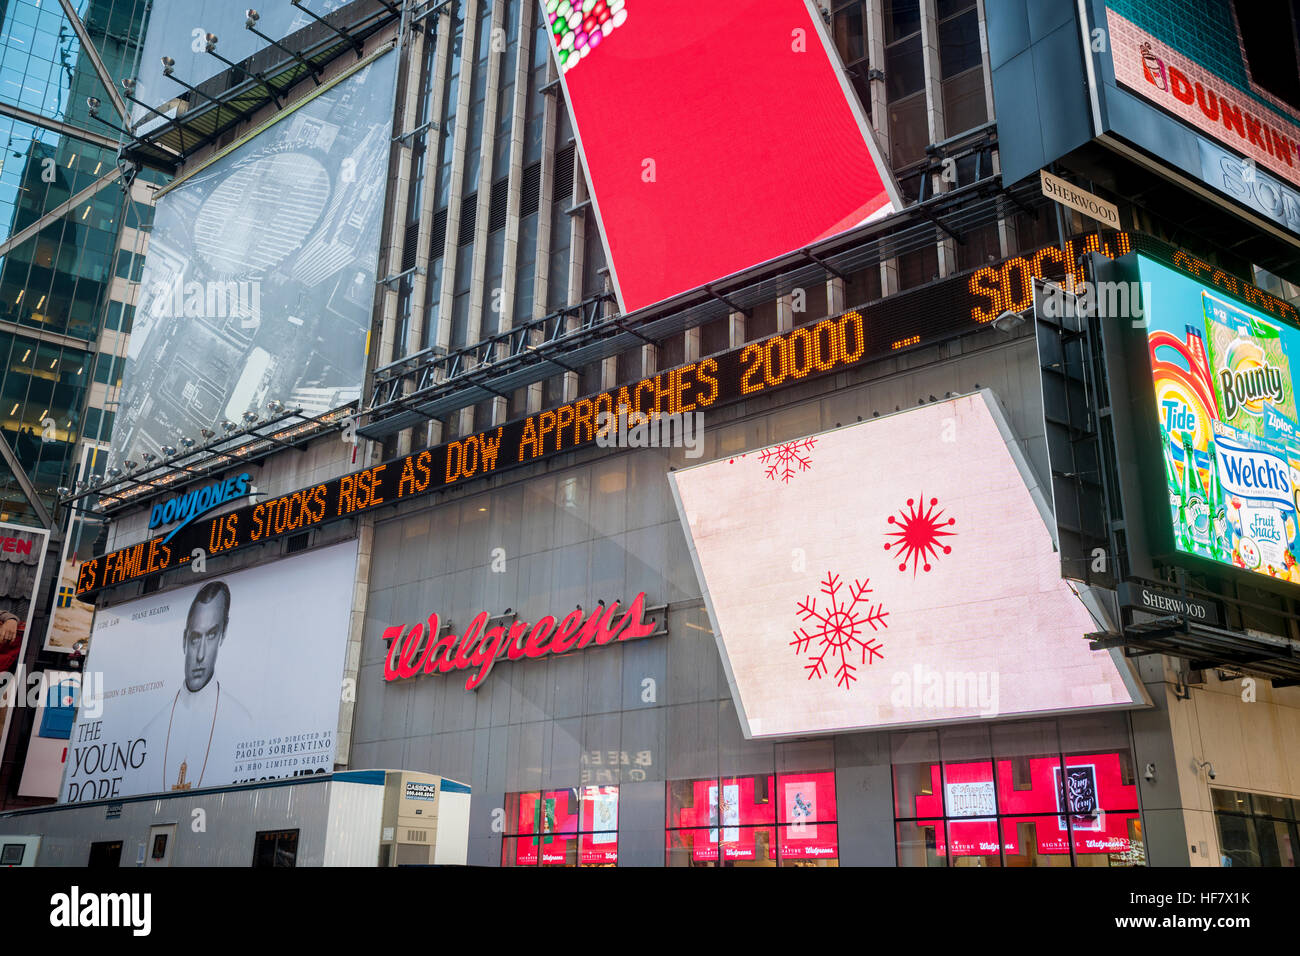 The news ticker in Times Square in New York on Tuesday, December 20, 2016 informs readers that the Dow Jones Industrial Average approached 20,000. (© Richard B. Levine) Stock Photo